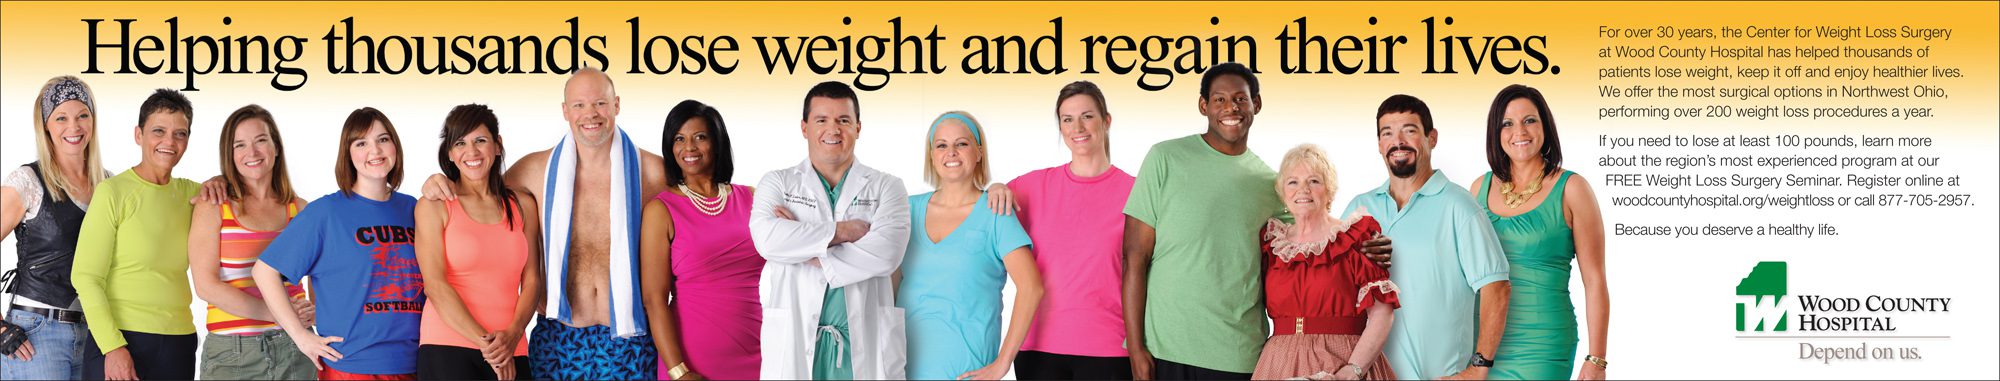 Weight loss patients with doc for billboard 2